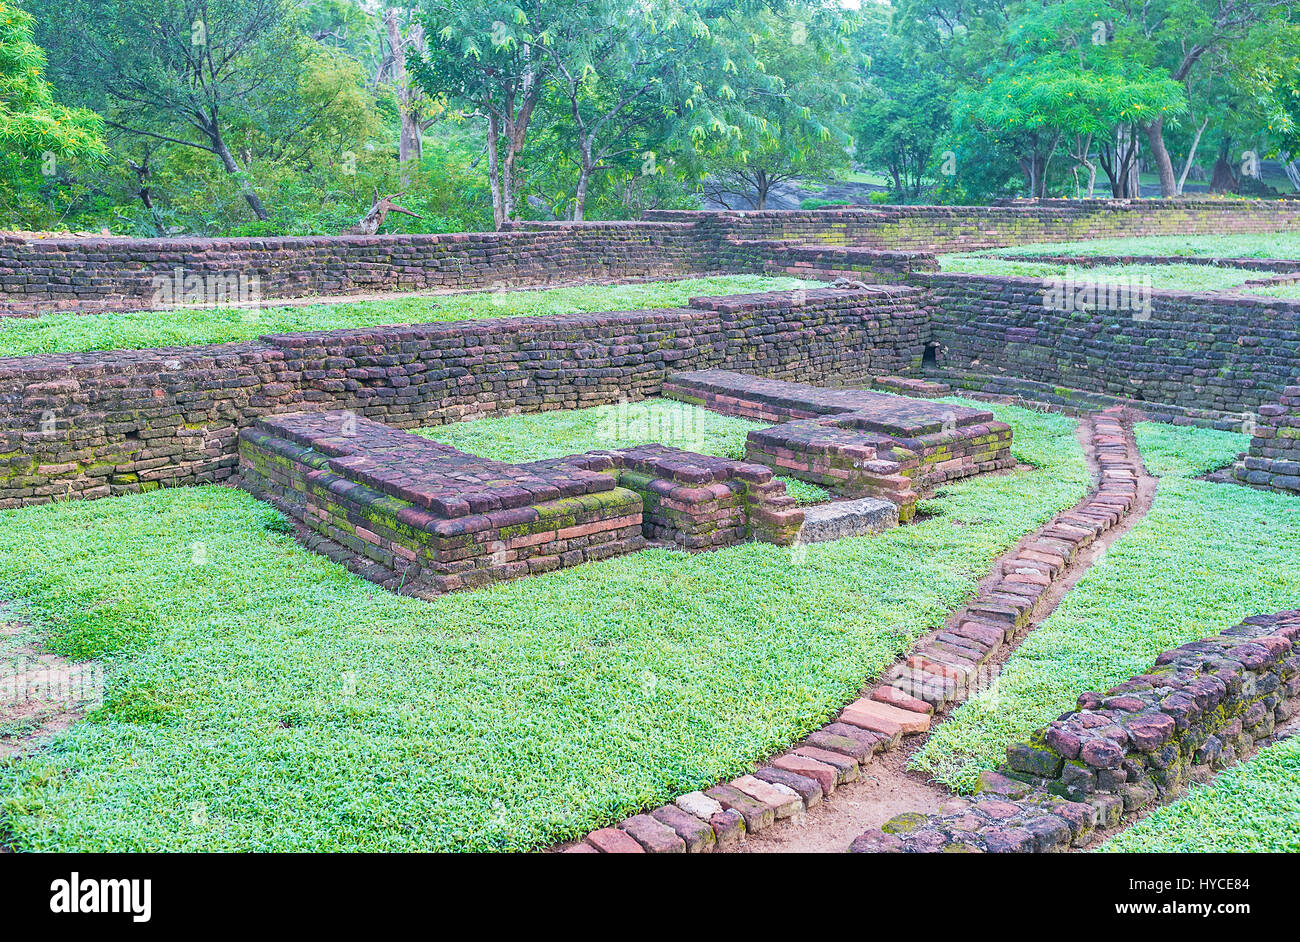 Sigiriya Fortress is the famous archaeological site with preserved examples of ancient urban planning, Sri Lanka. Stock Photo